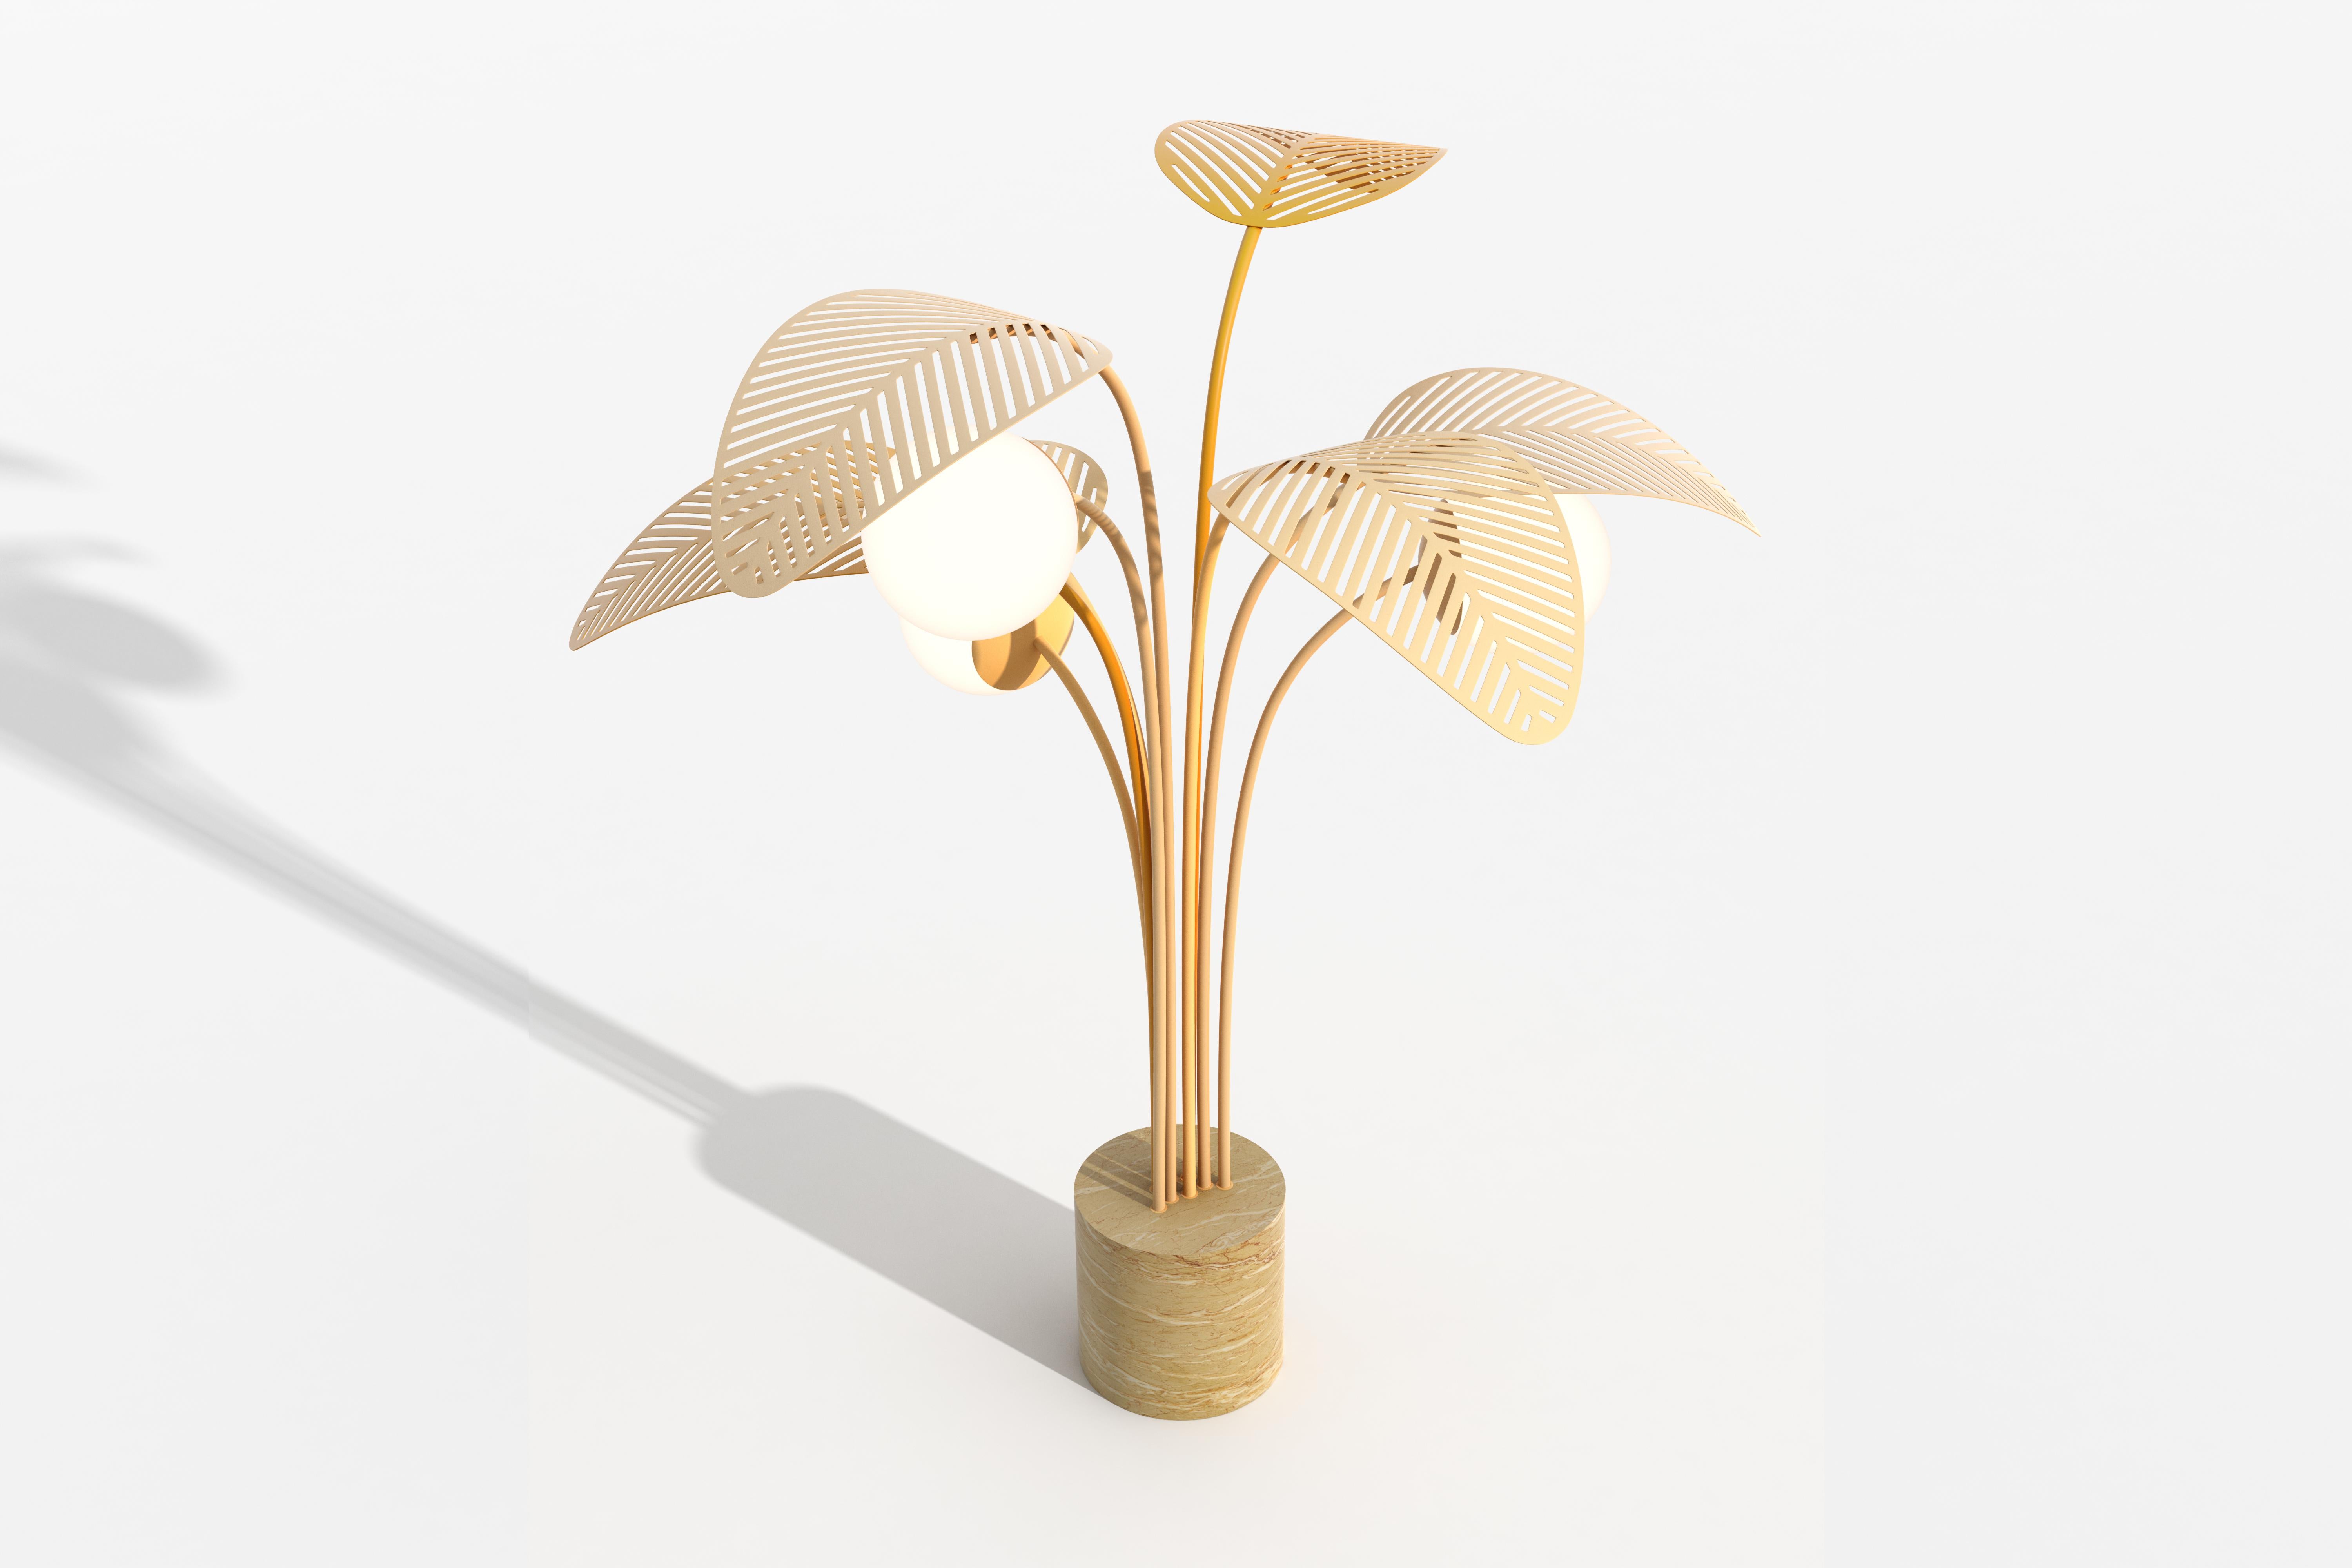 Floor lamp with Giallo Egitto gold marble base, sheltered by six giant palm leaves, die-cut in metal and powder coated in satin yellow.

Designed by Parisian-Italian artist Marc Ange, who’s creations are always balanced between real and unreal,